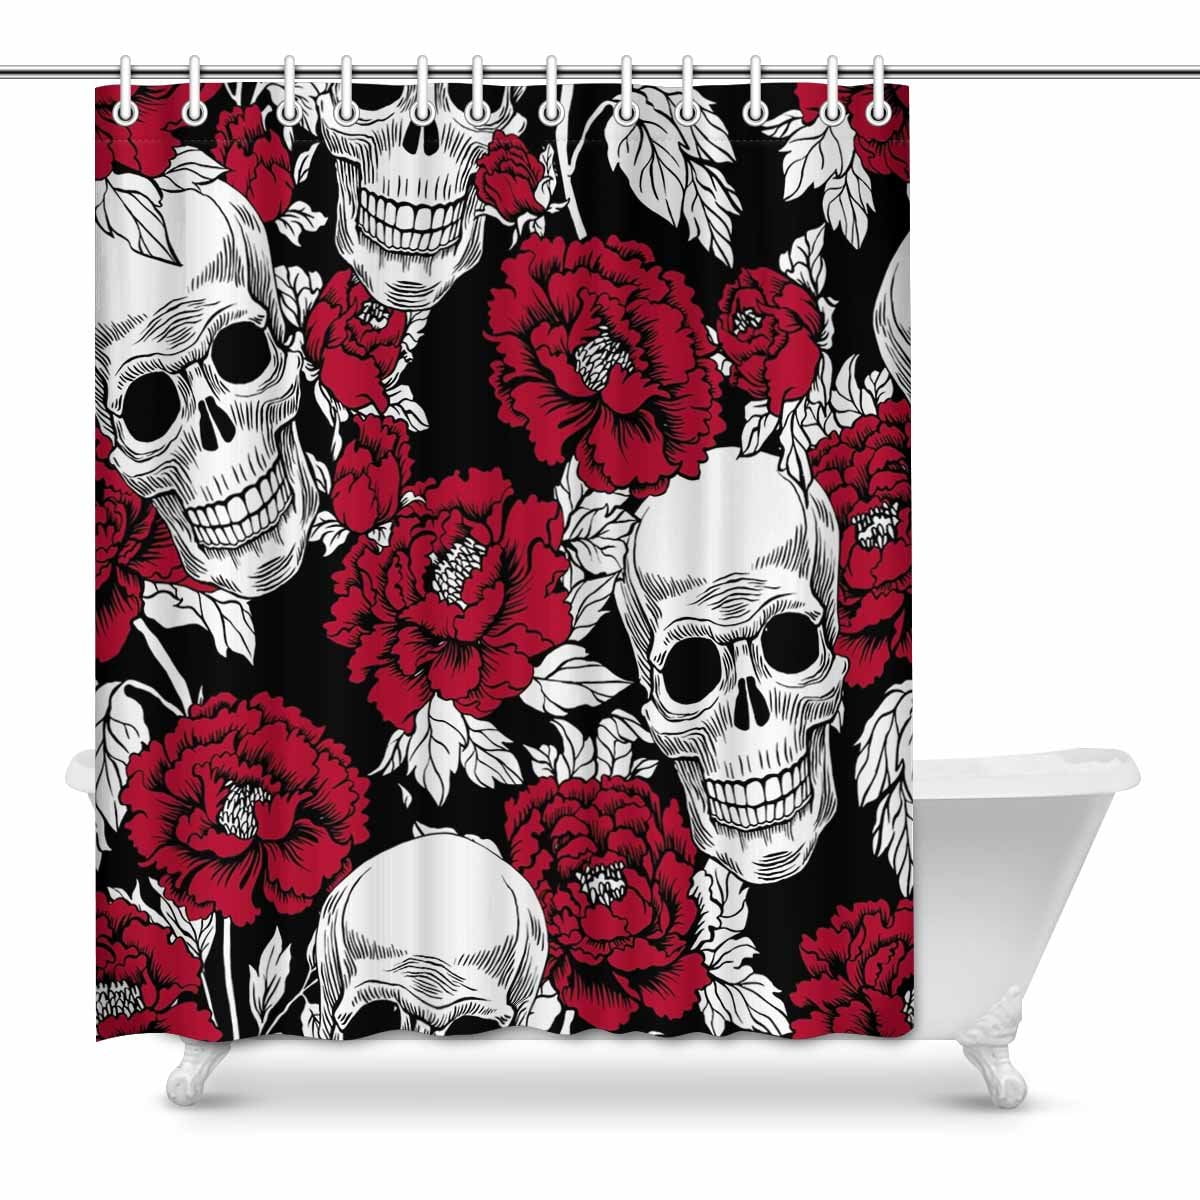 Pop Skull And With Flowers Peony Day Of The Dead Gold Skull Bathroom Decor Shower Curtain Set 60x72 Inch Walmart Canada